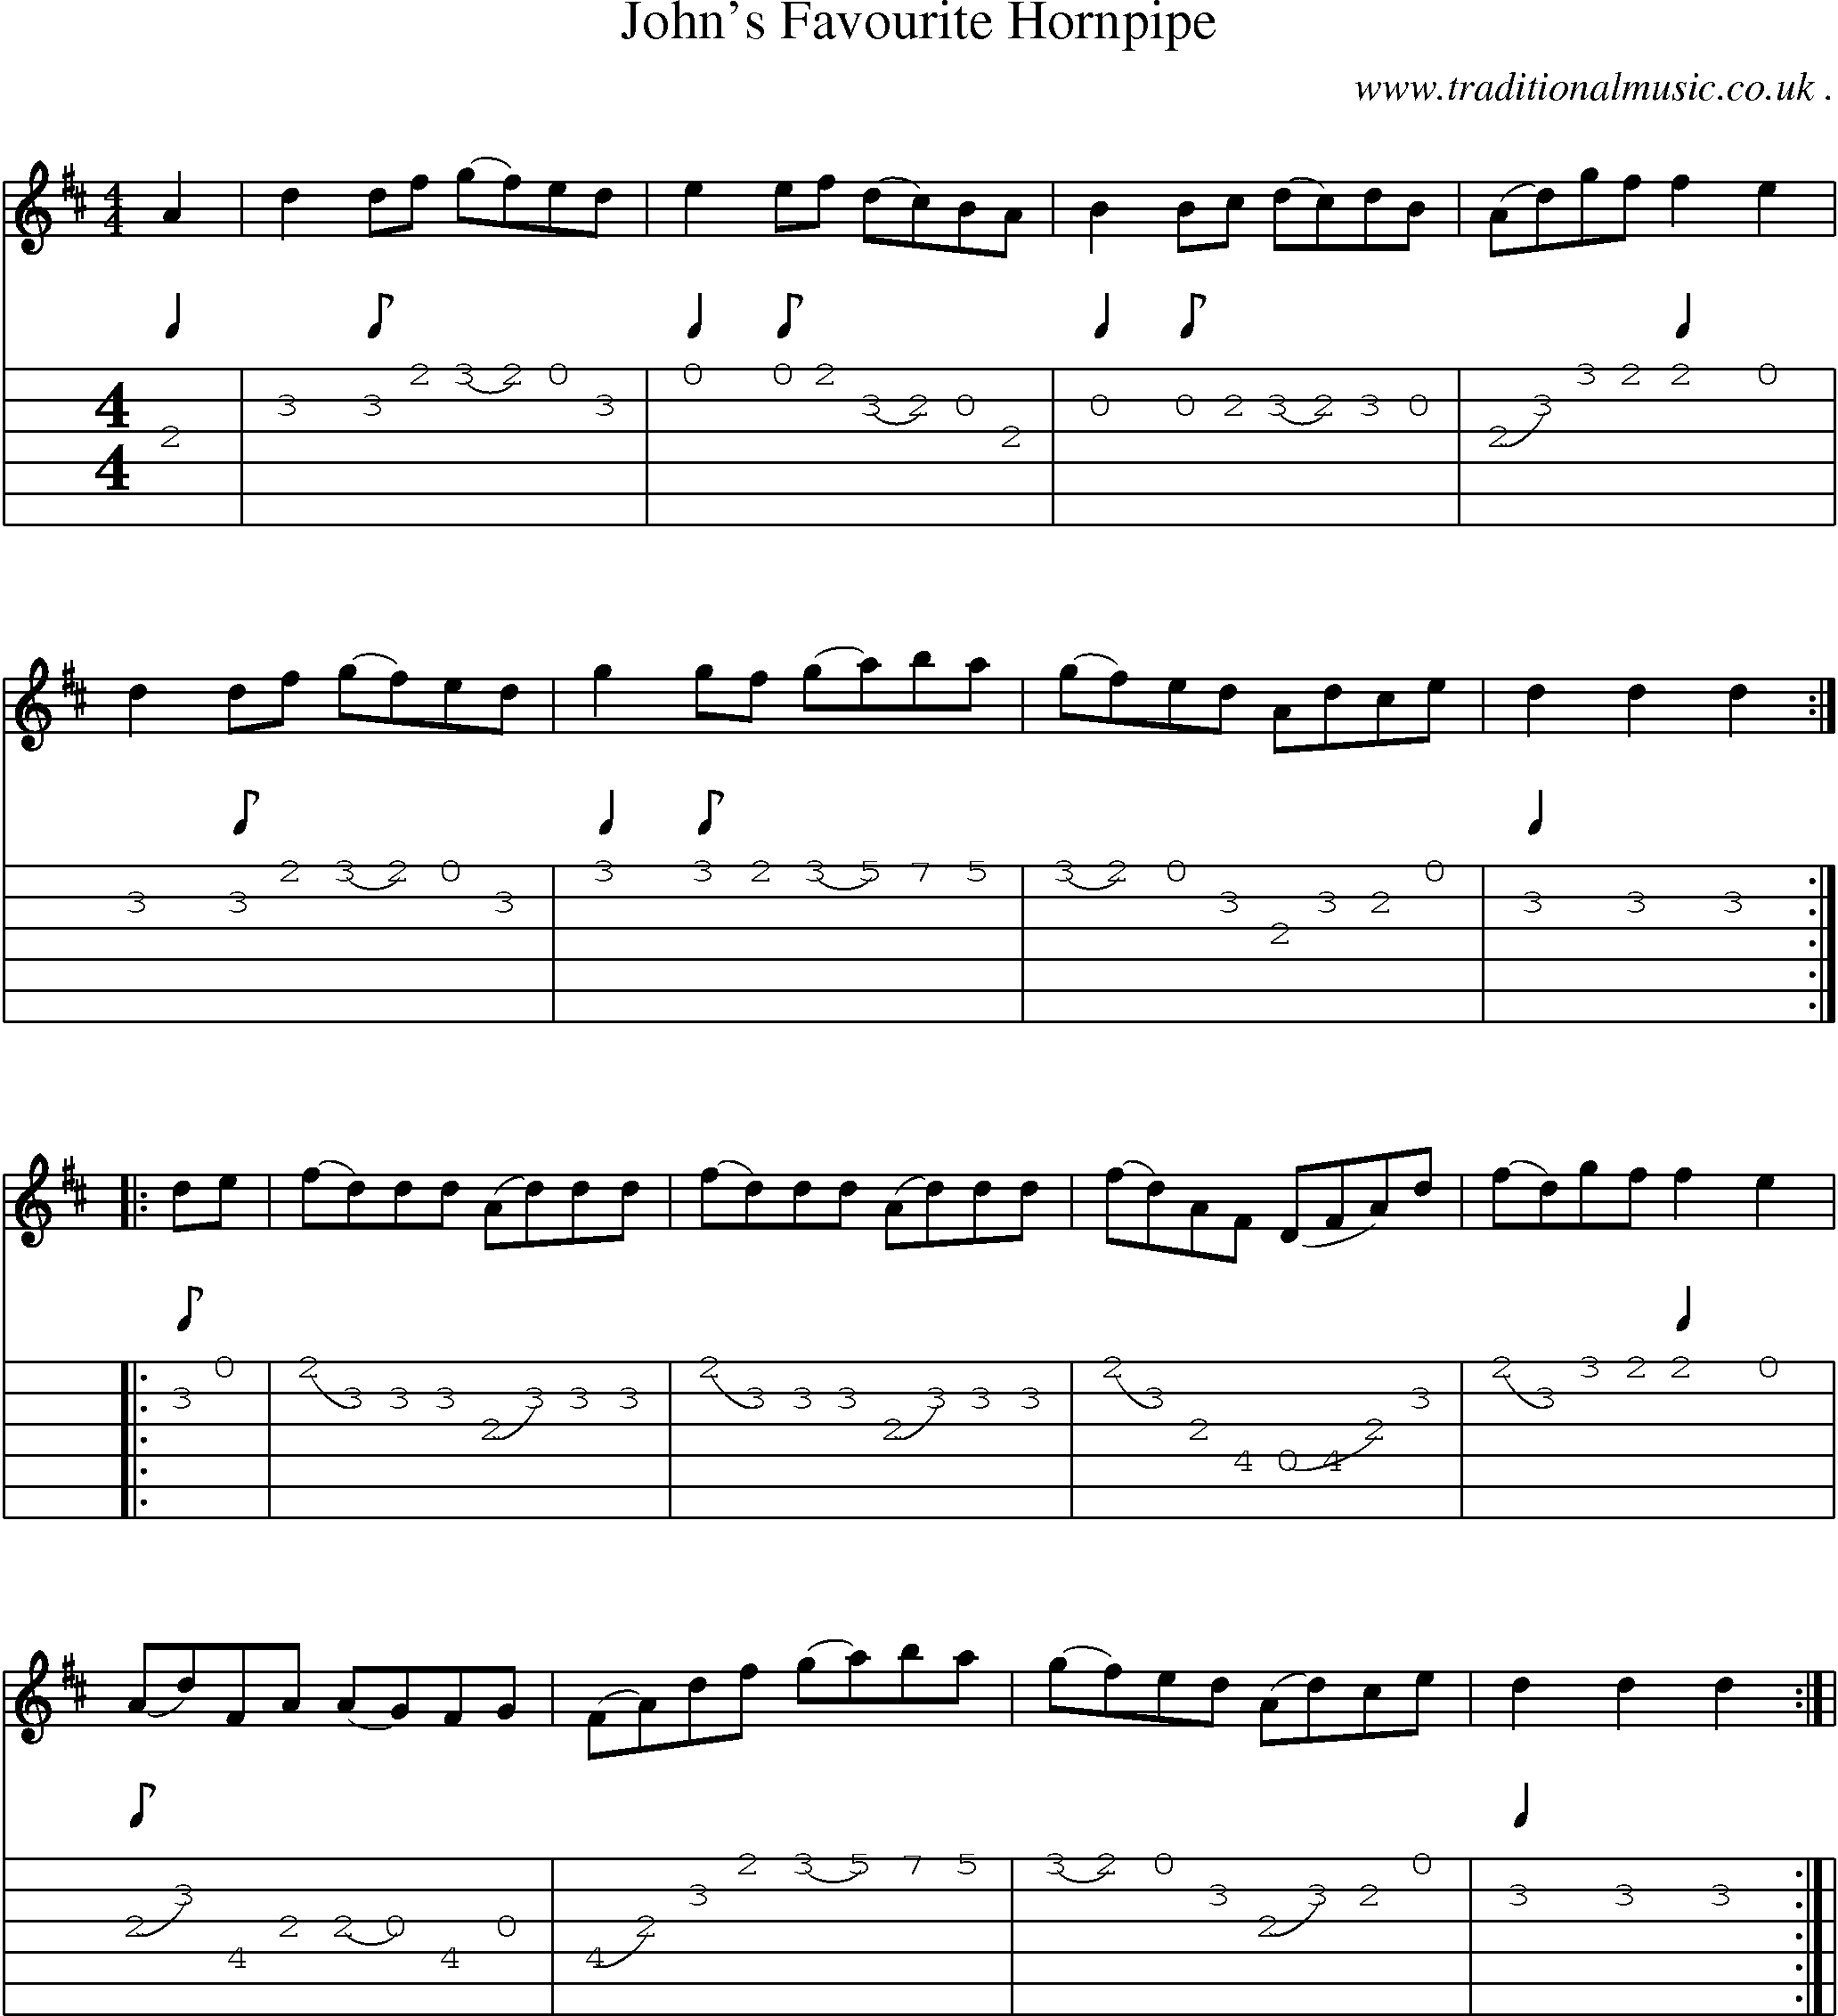 Sheet-Music and Guitar Tabs for Johns Favourite Hornpipe